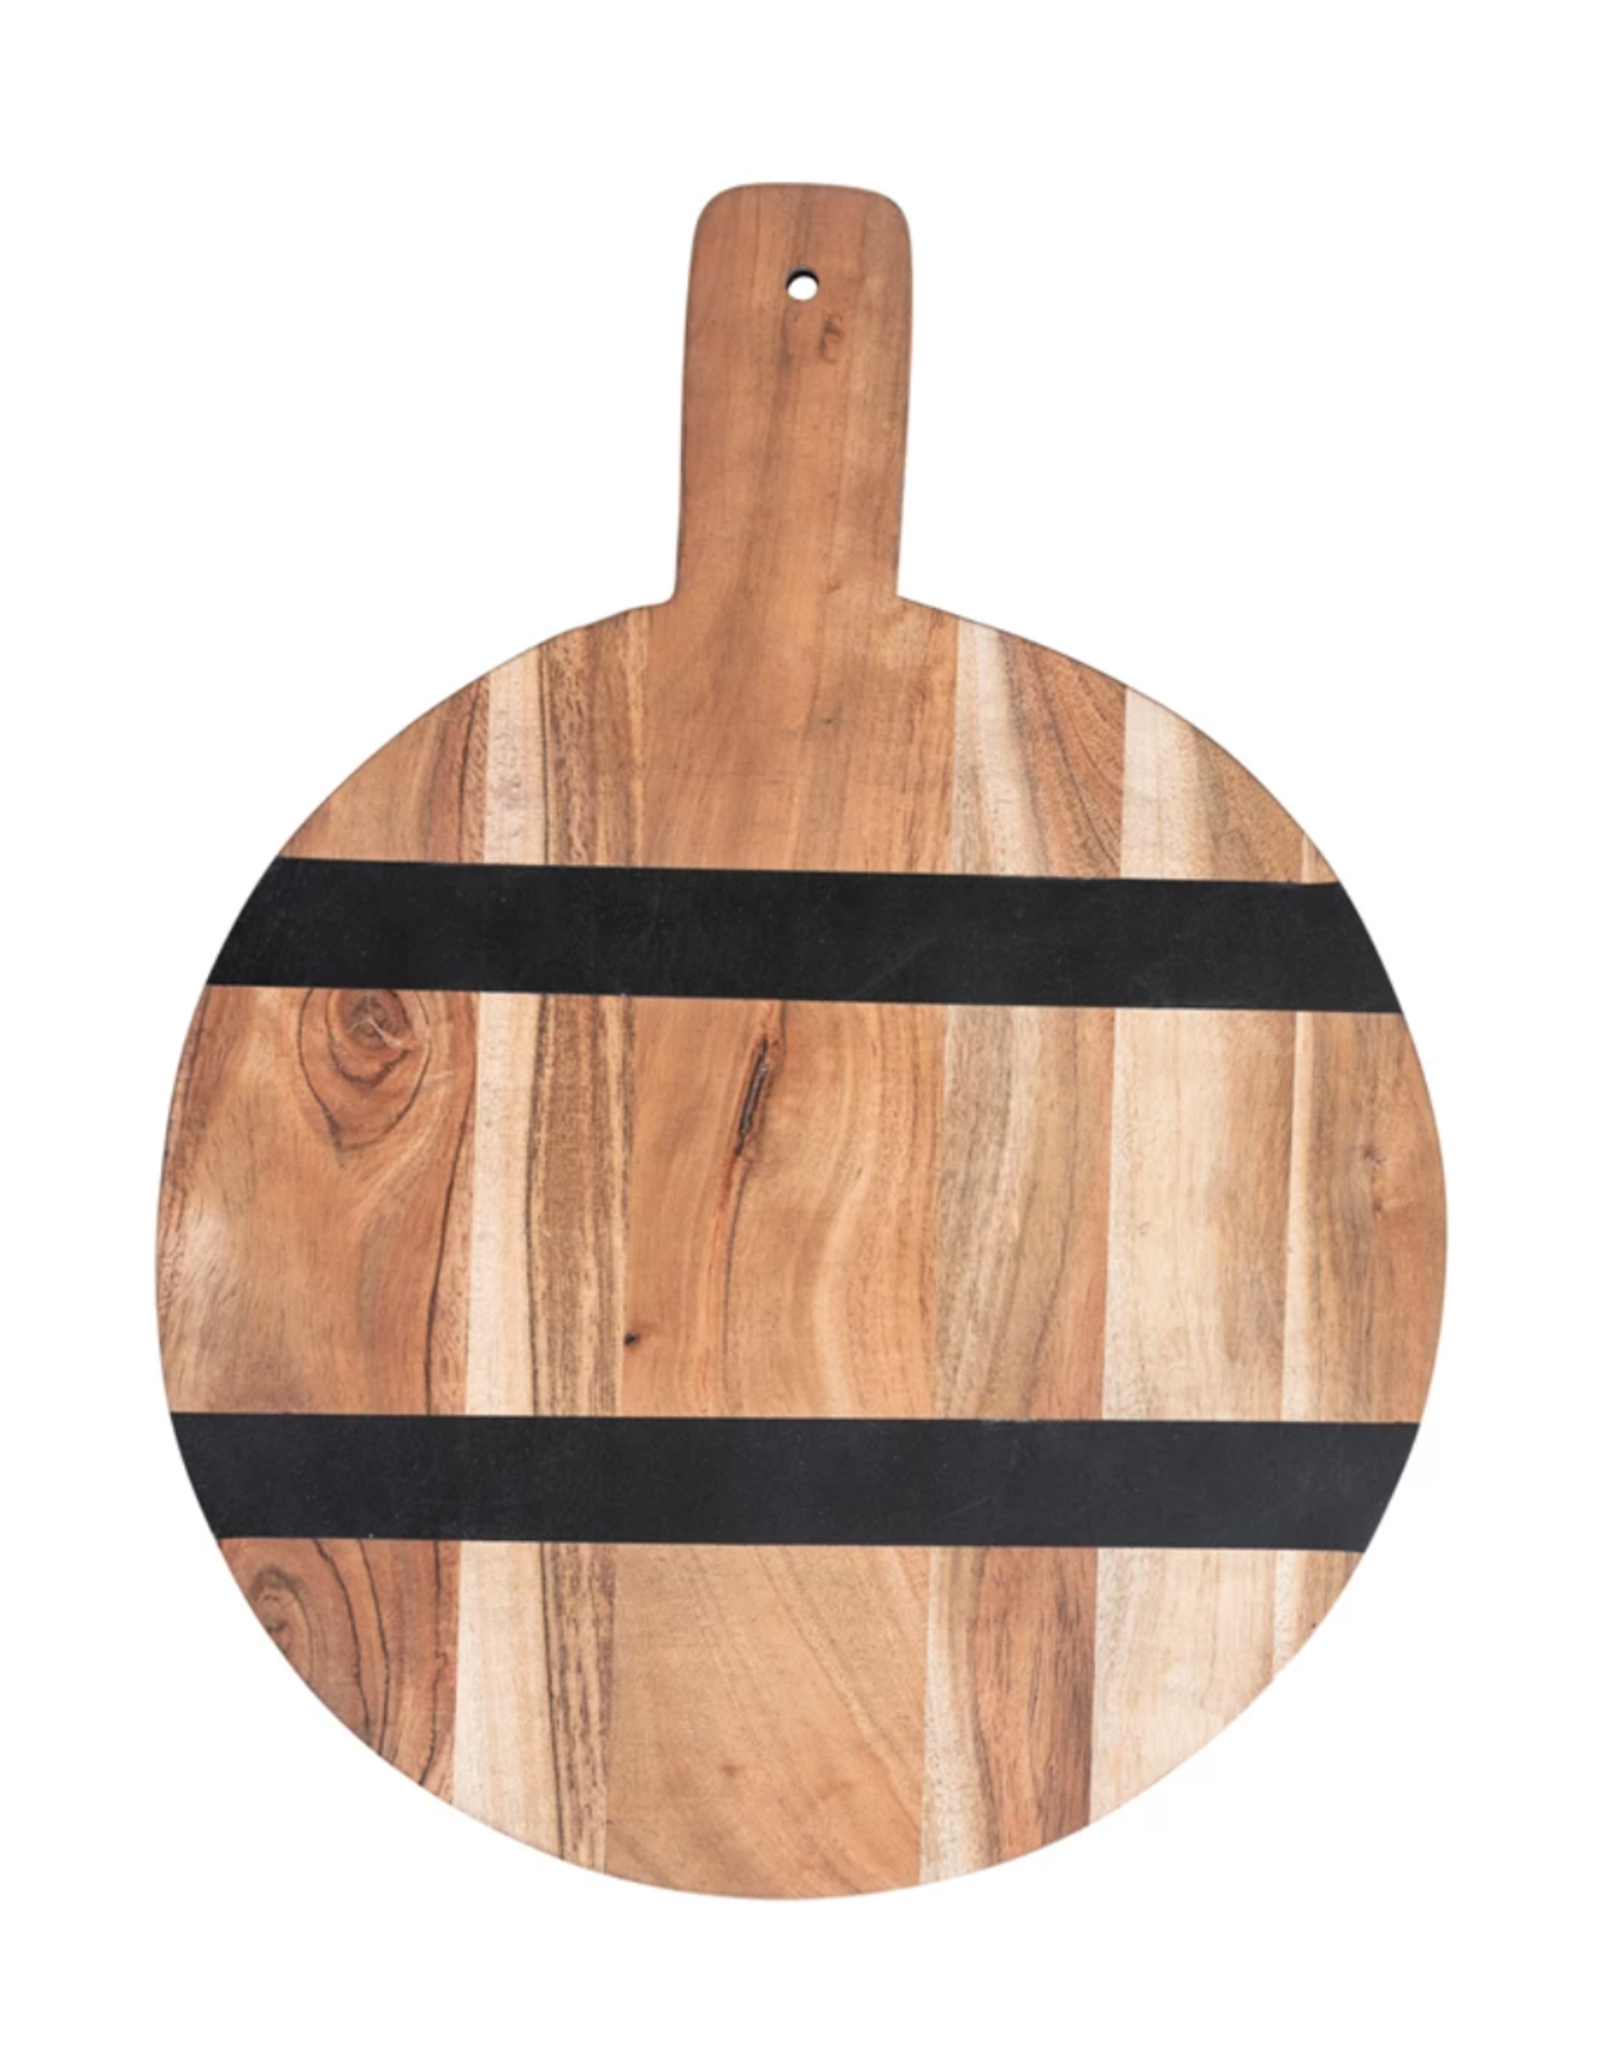 Bloomingville Round Mango Wood Cheese/Cutting Board w/ Stripes, Natural & Black